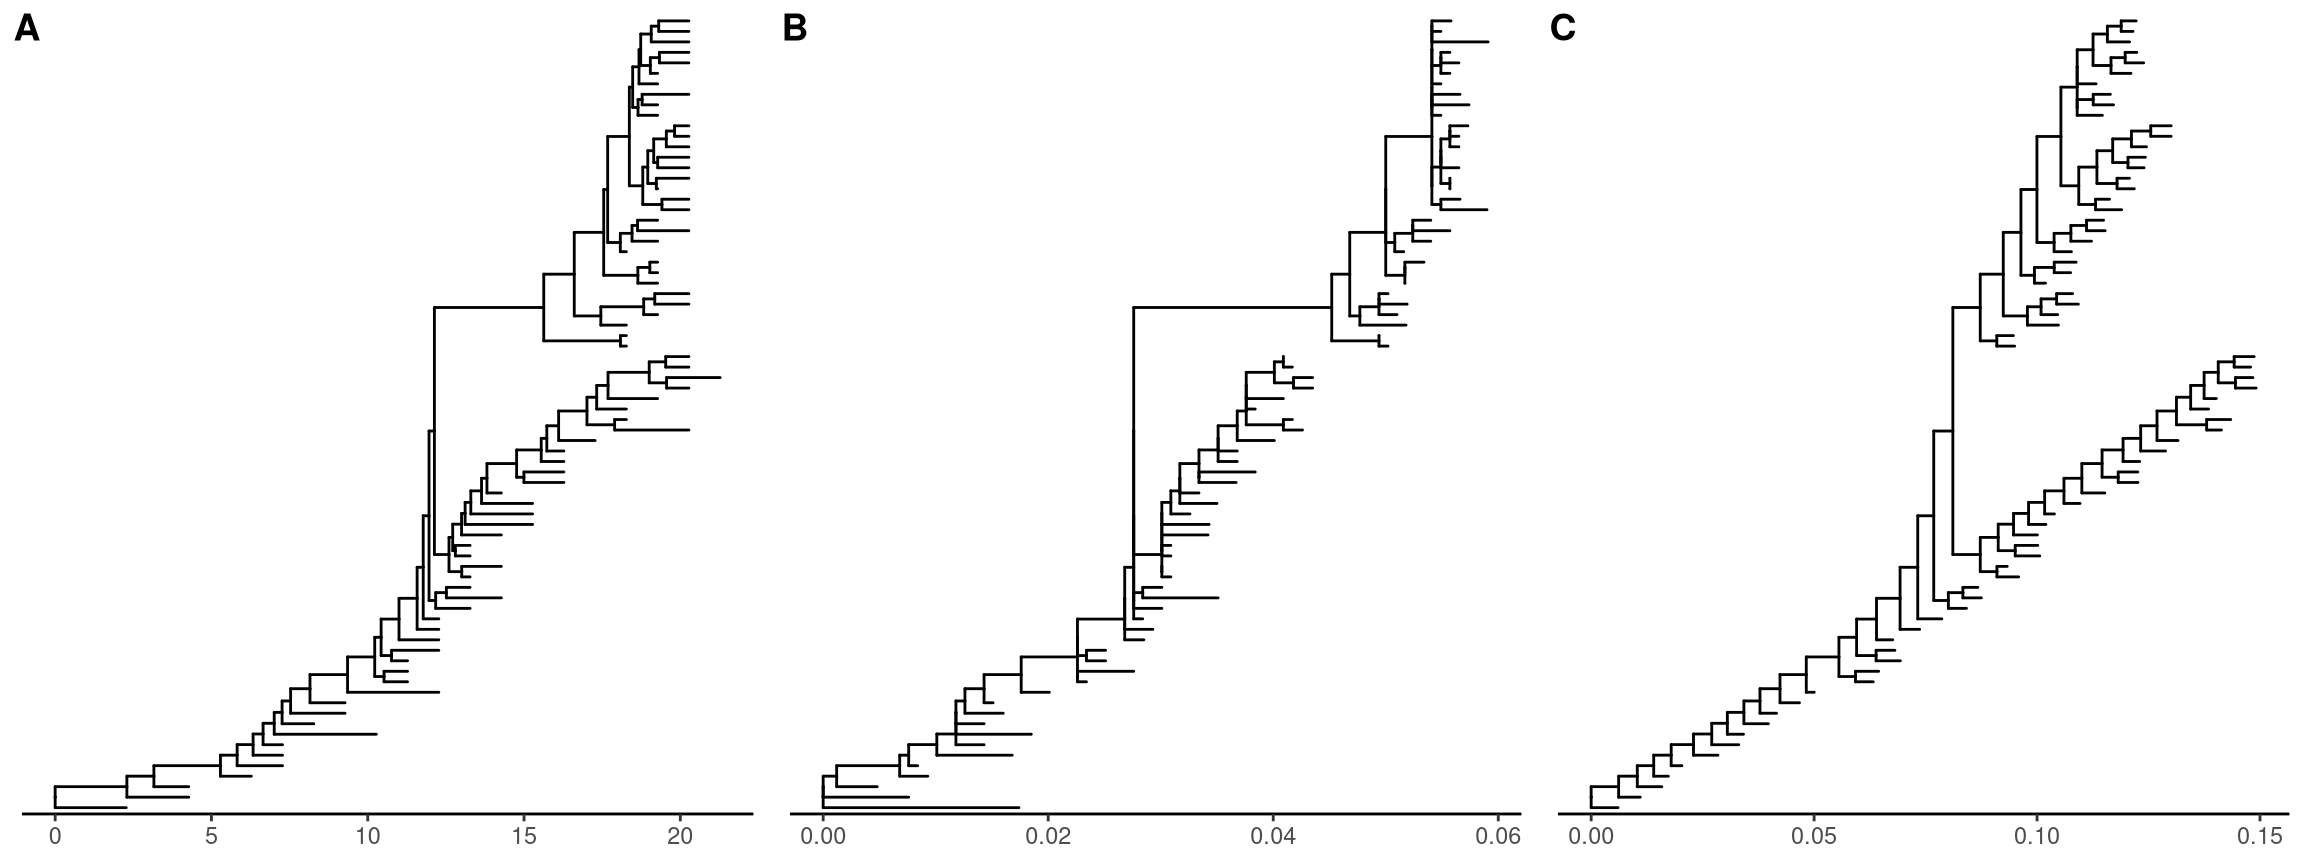 Re-scaling tree branches. The tree with branches scaled in time (year from the root) (A). The tree was re-scaled using dN as branch lengths (B). The tree was re-scaled using substitution rates (C).